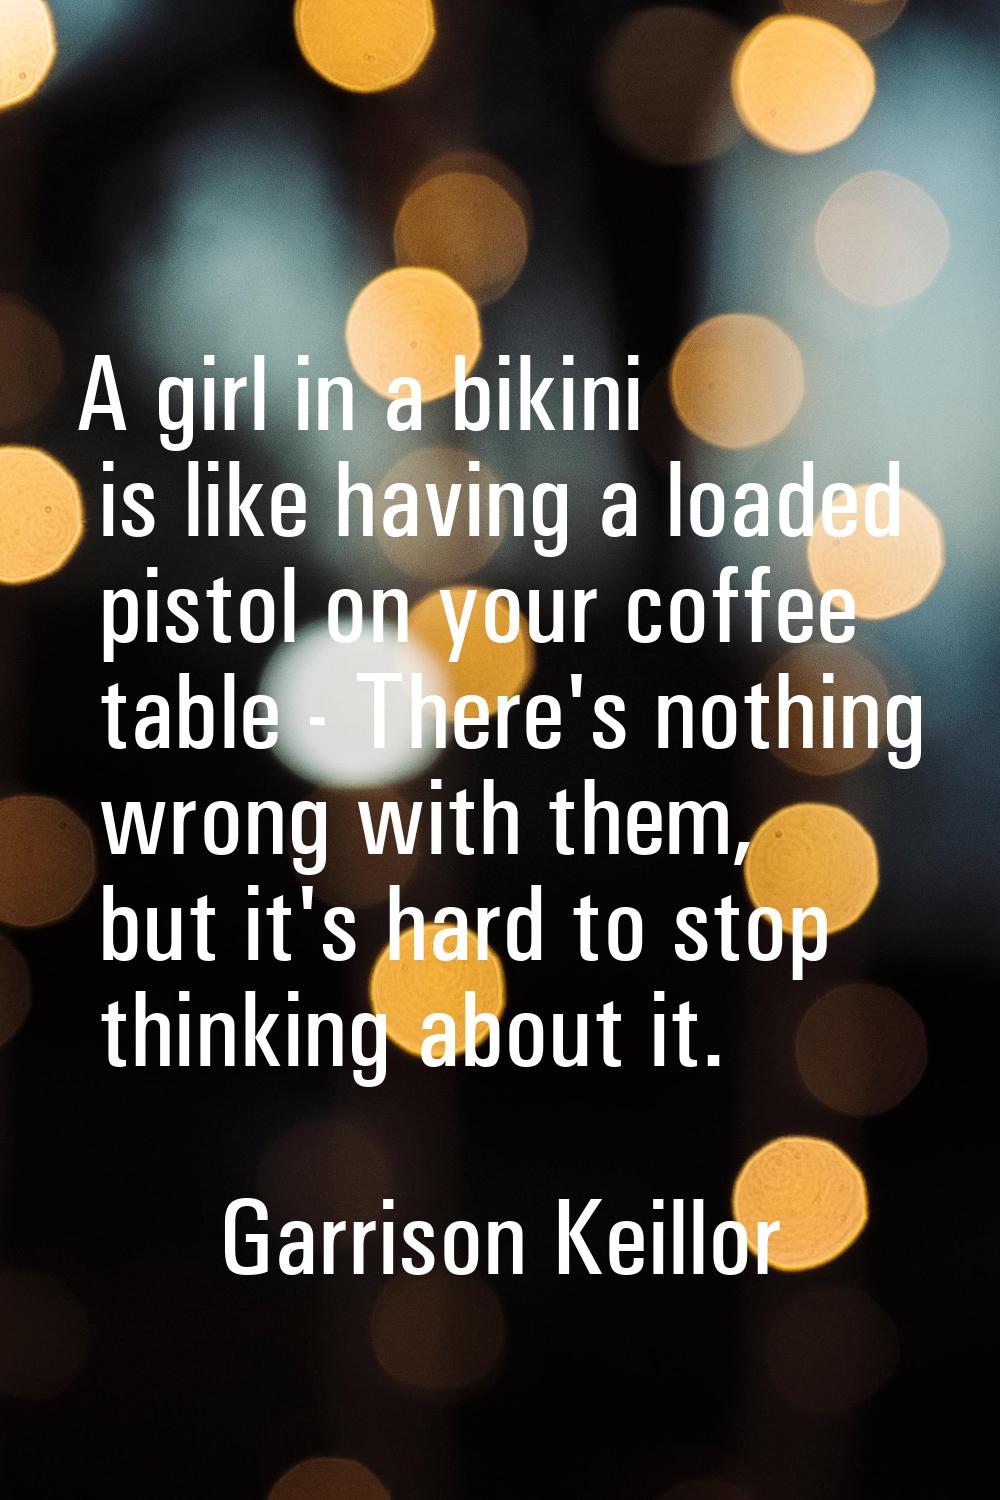 A girl in a bikini is like having a loaded pistol on your coffee table - There's nothing wrong with